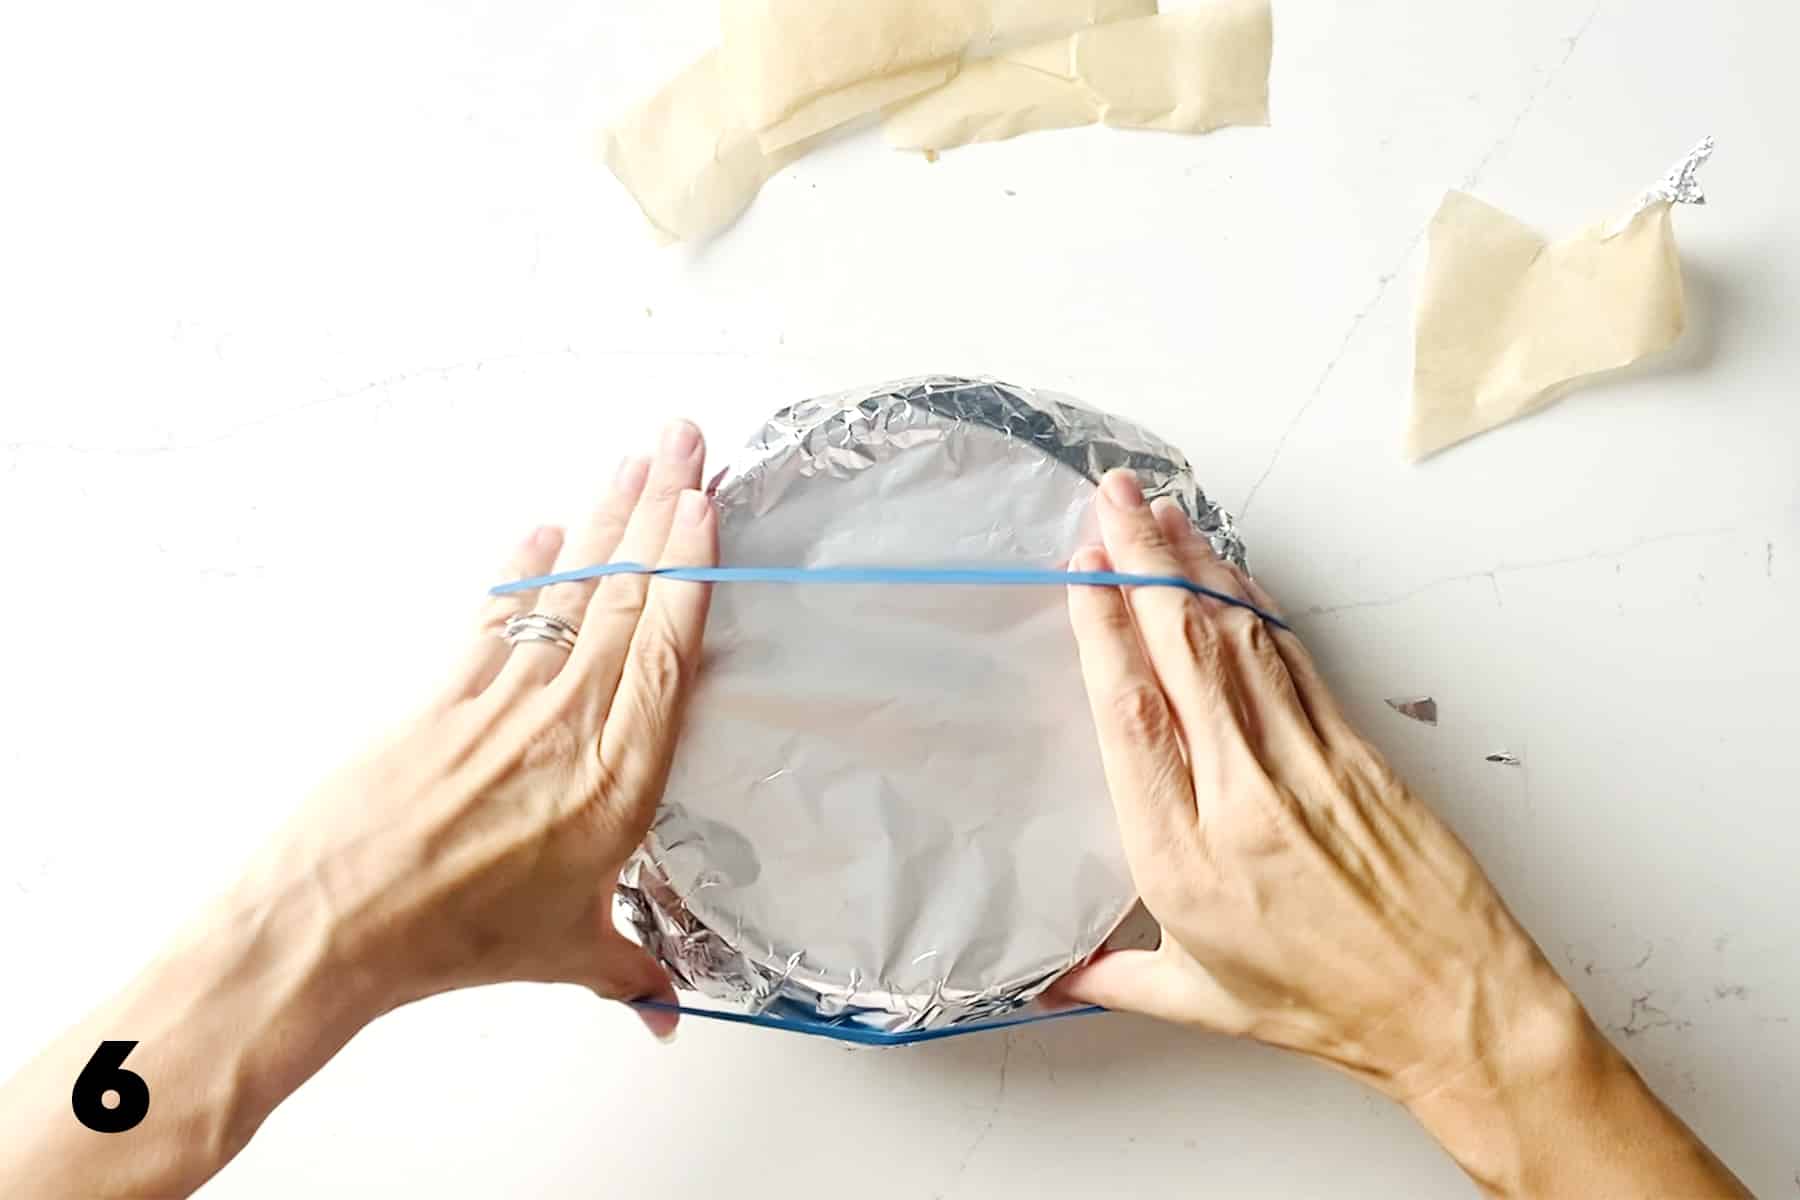 hands wrapping rubber band around top of foil covered bowl